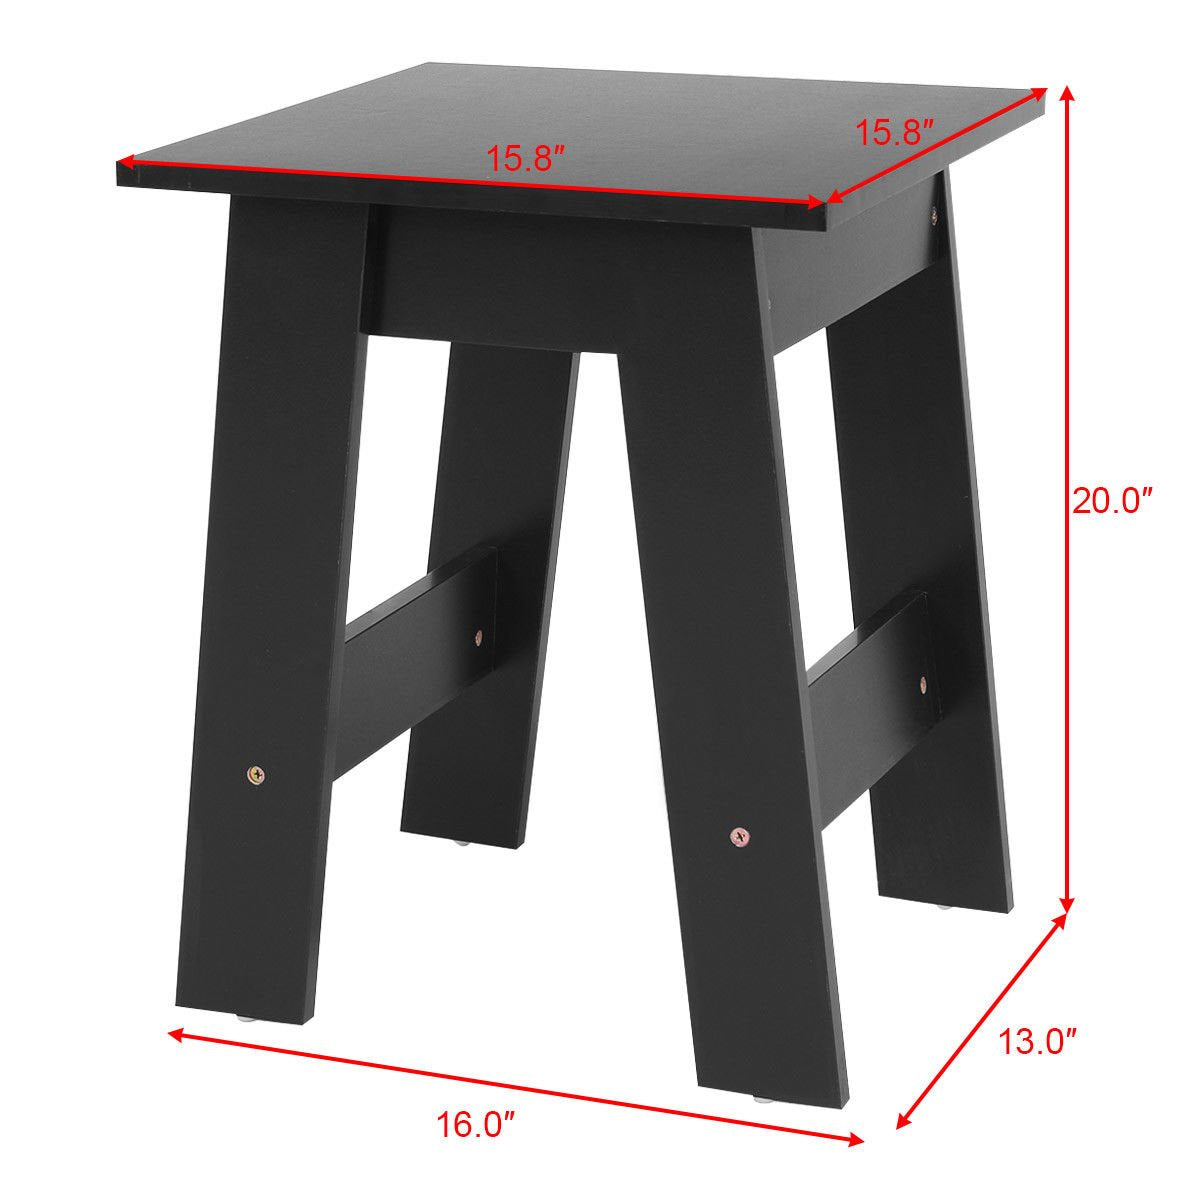 Giantex End Table Accent Coffee Table Modern Simple Design Home Furniture Side Desk Table Black